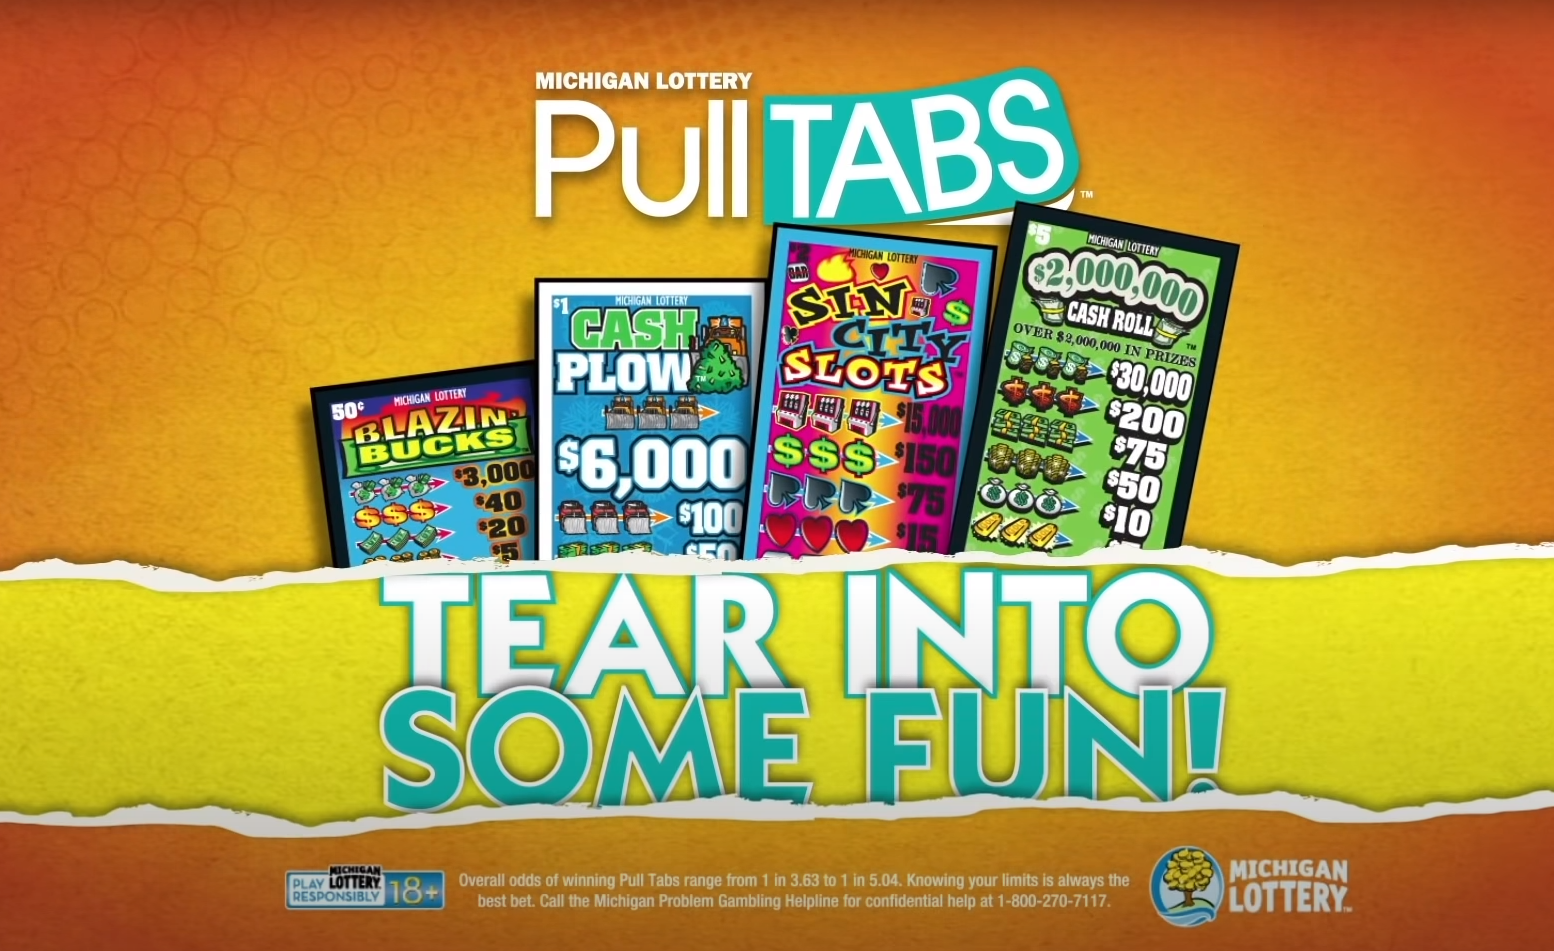 Play Michigan Lottery Pull Tabs at Brookside Golf Course in Gowen Michigan